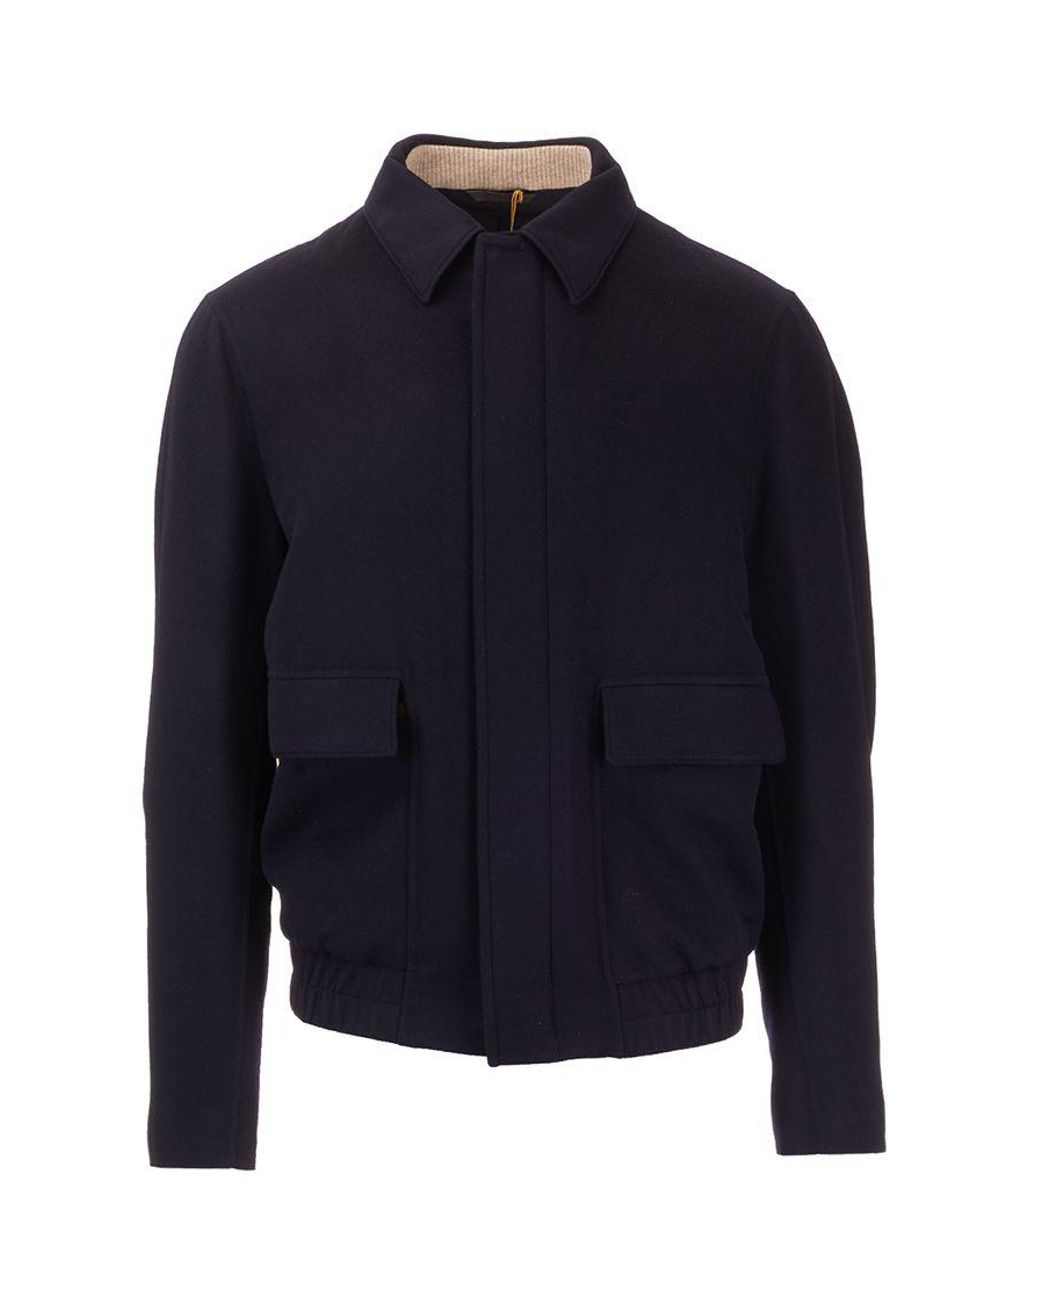 Loro Piana Cashmere Outerwear Jacket in Blue for Men - Lyst